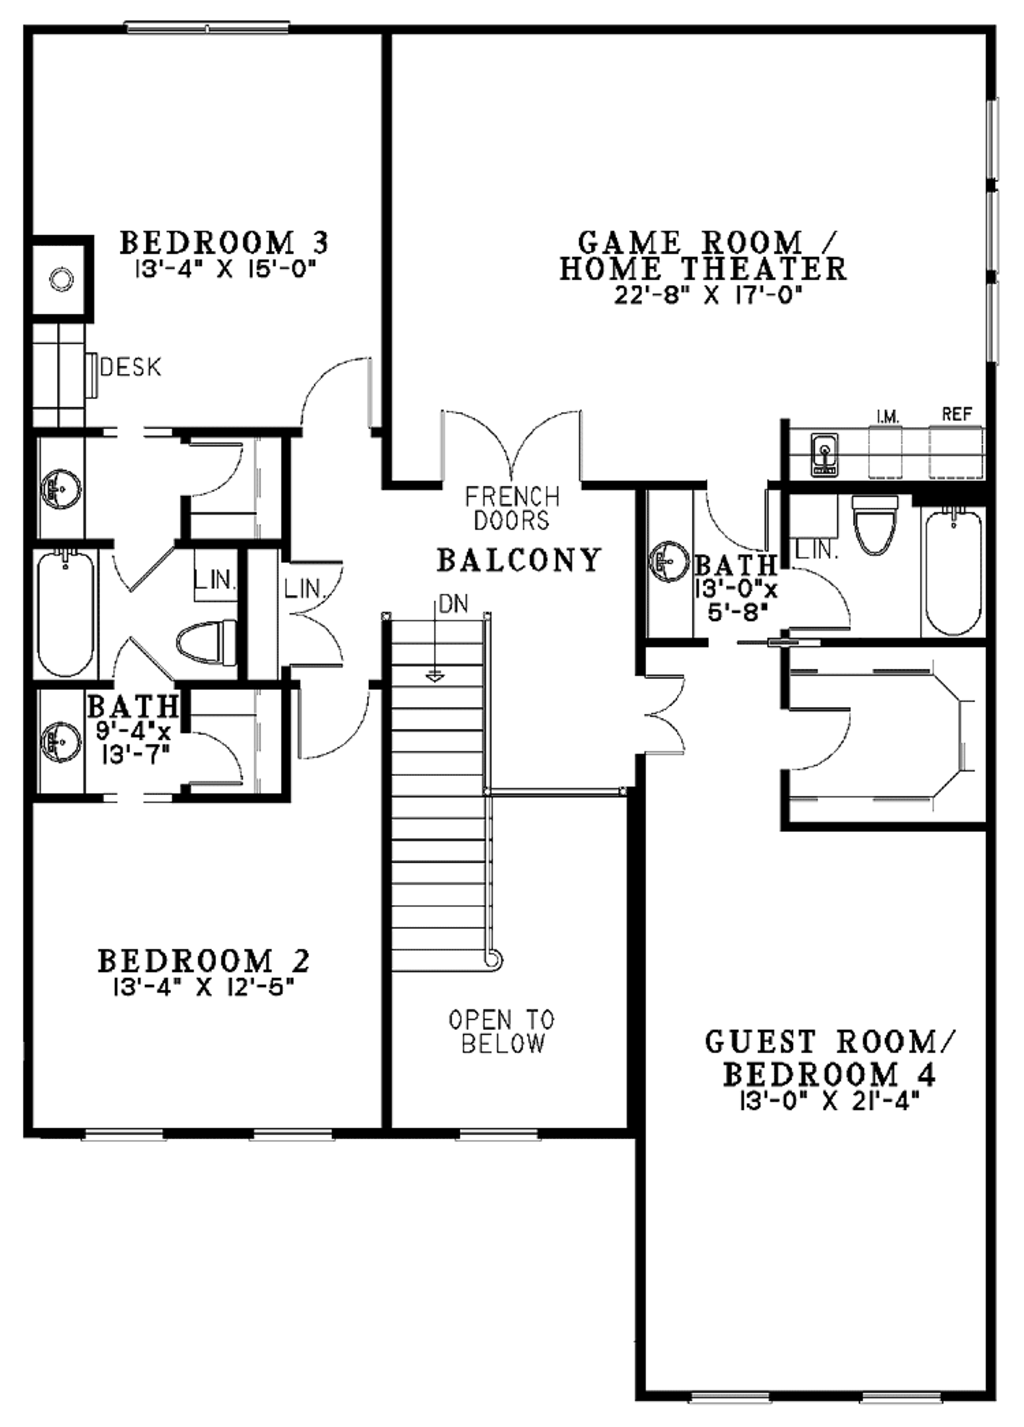 colonial-style-house-plan-4-beds-3-baths-3970-sq-ft-plan-17-2860